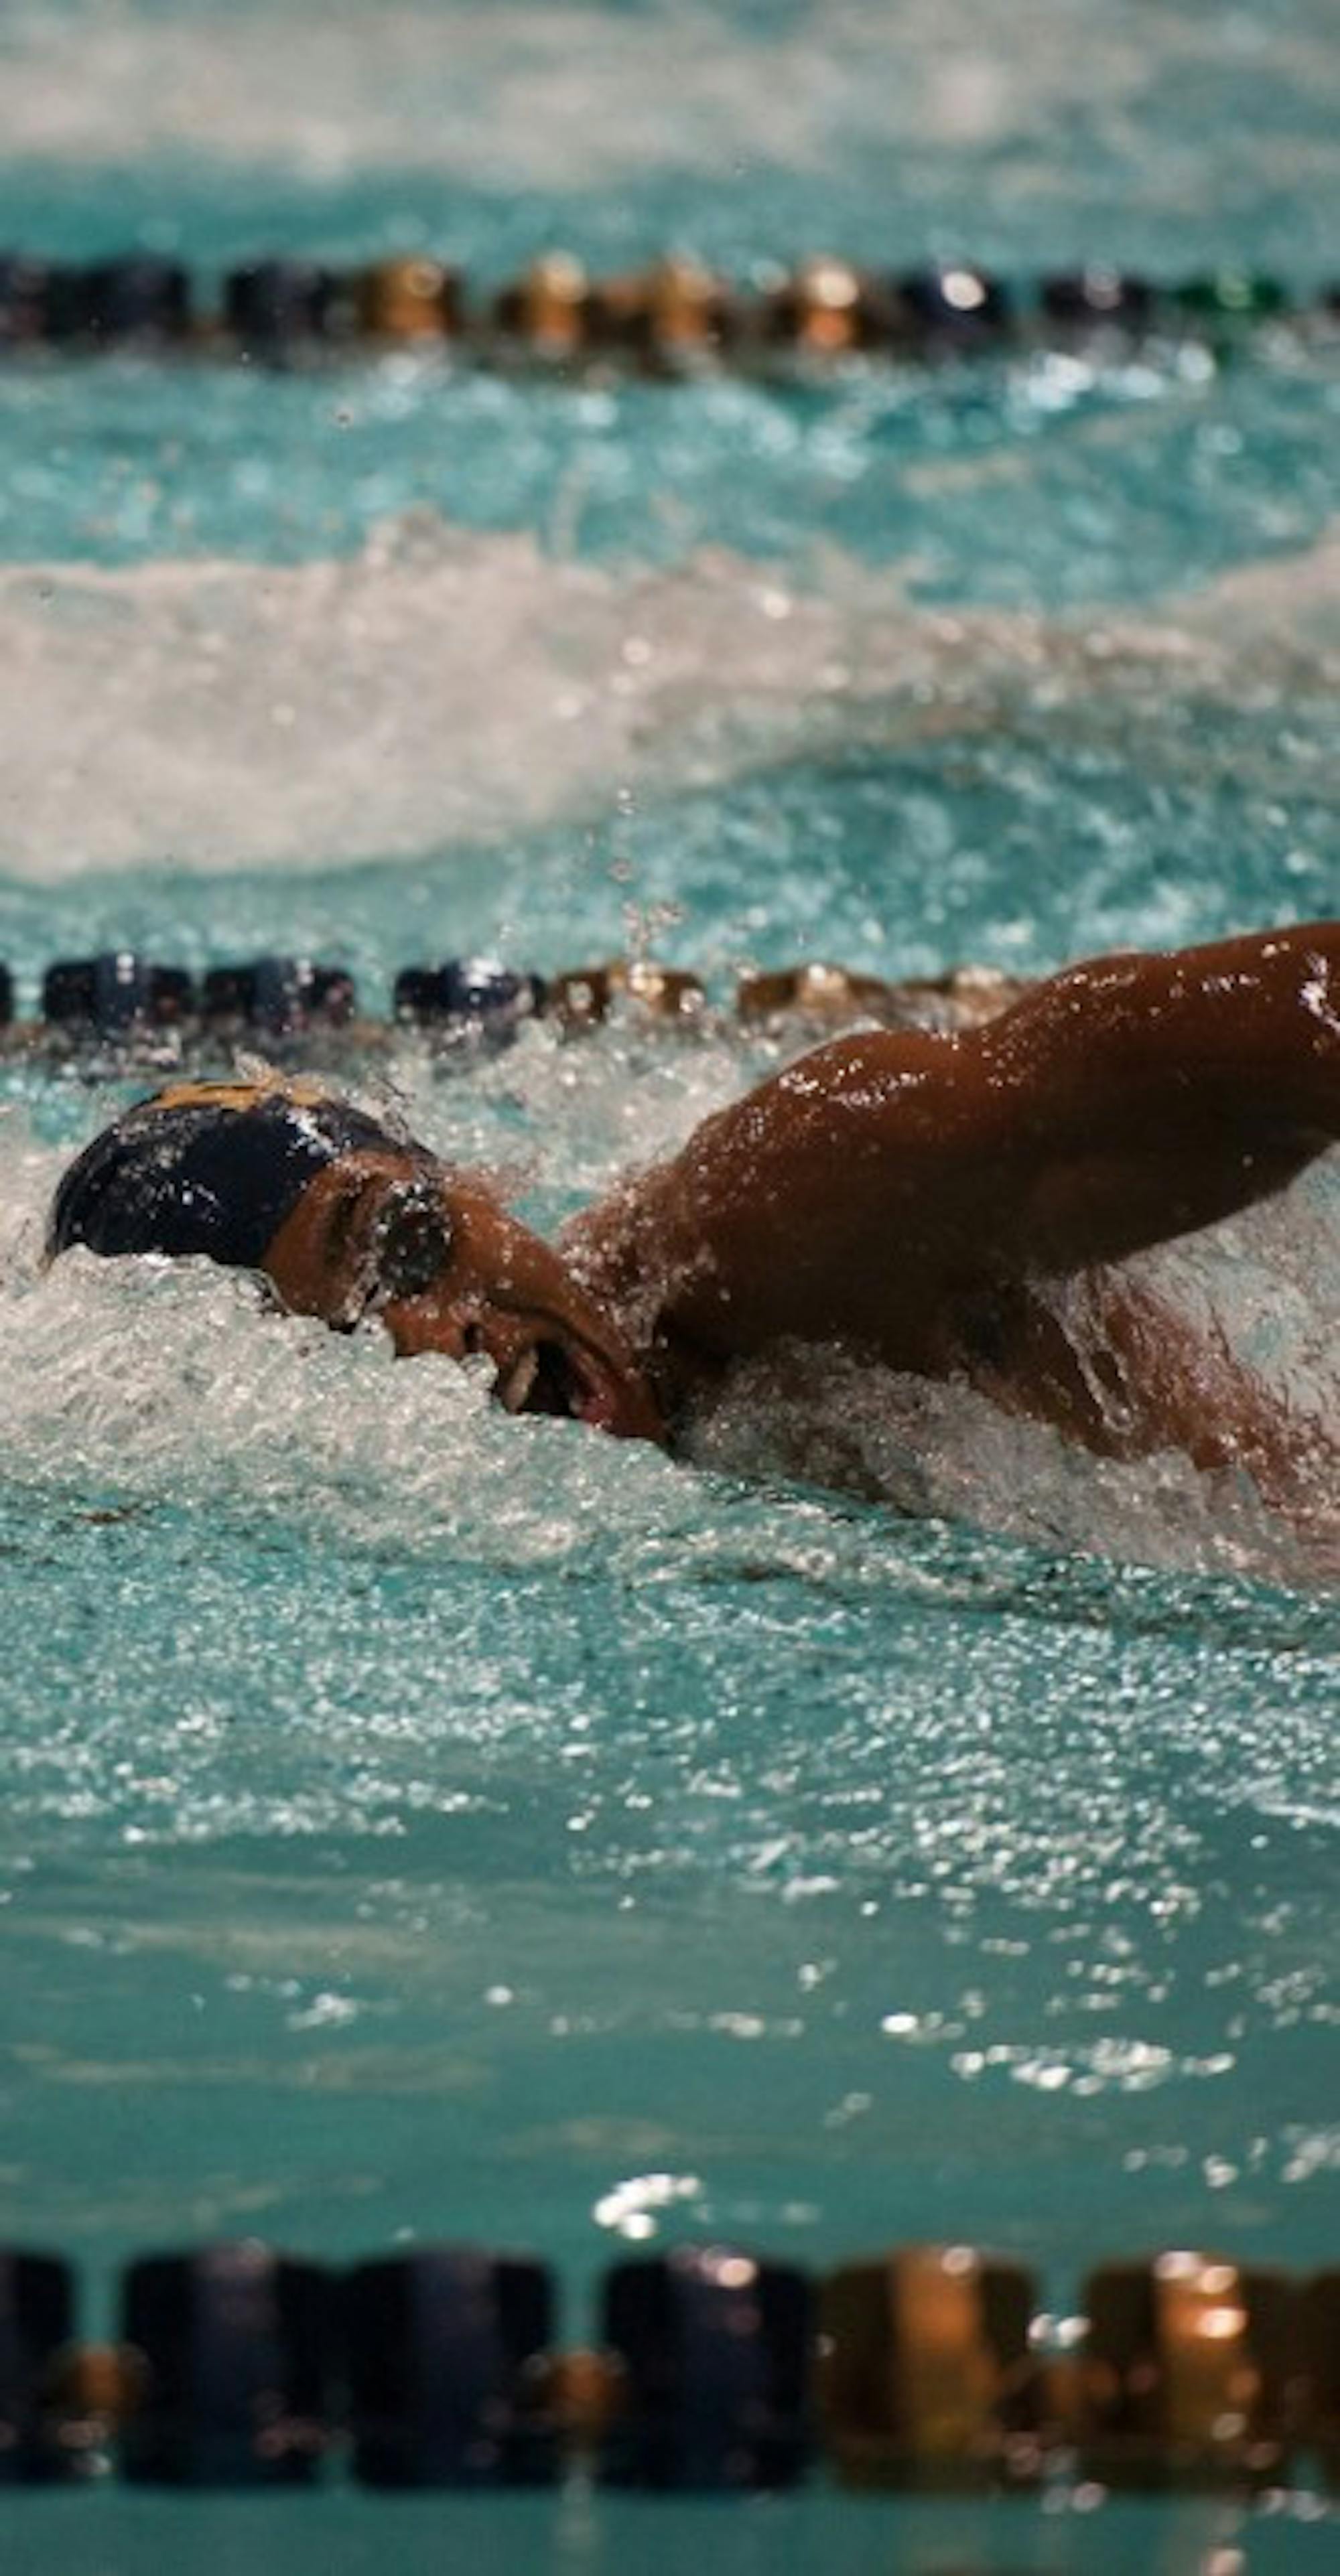 Irish sophomore Tabahn Afrik swims the 100-meter freestyle on Oct. 28 at Rolfs Aquatic Center. Afrik placed first in the race.